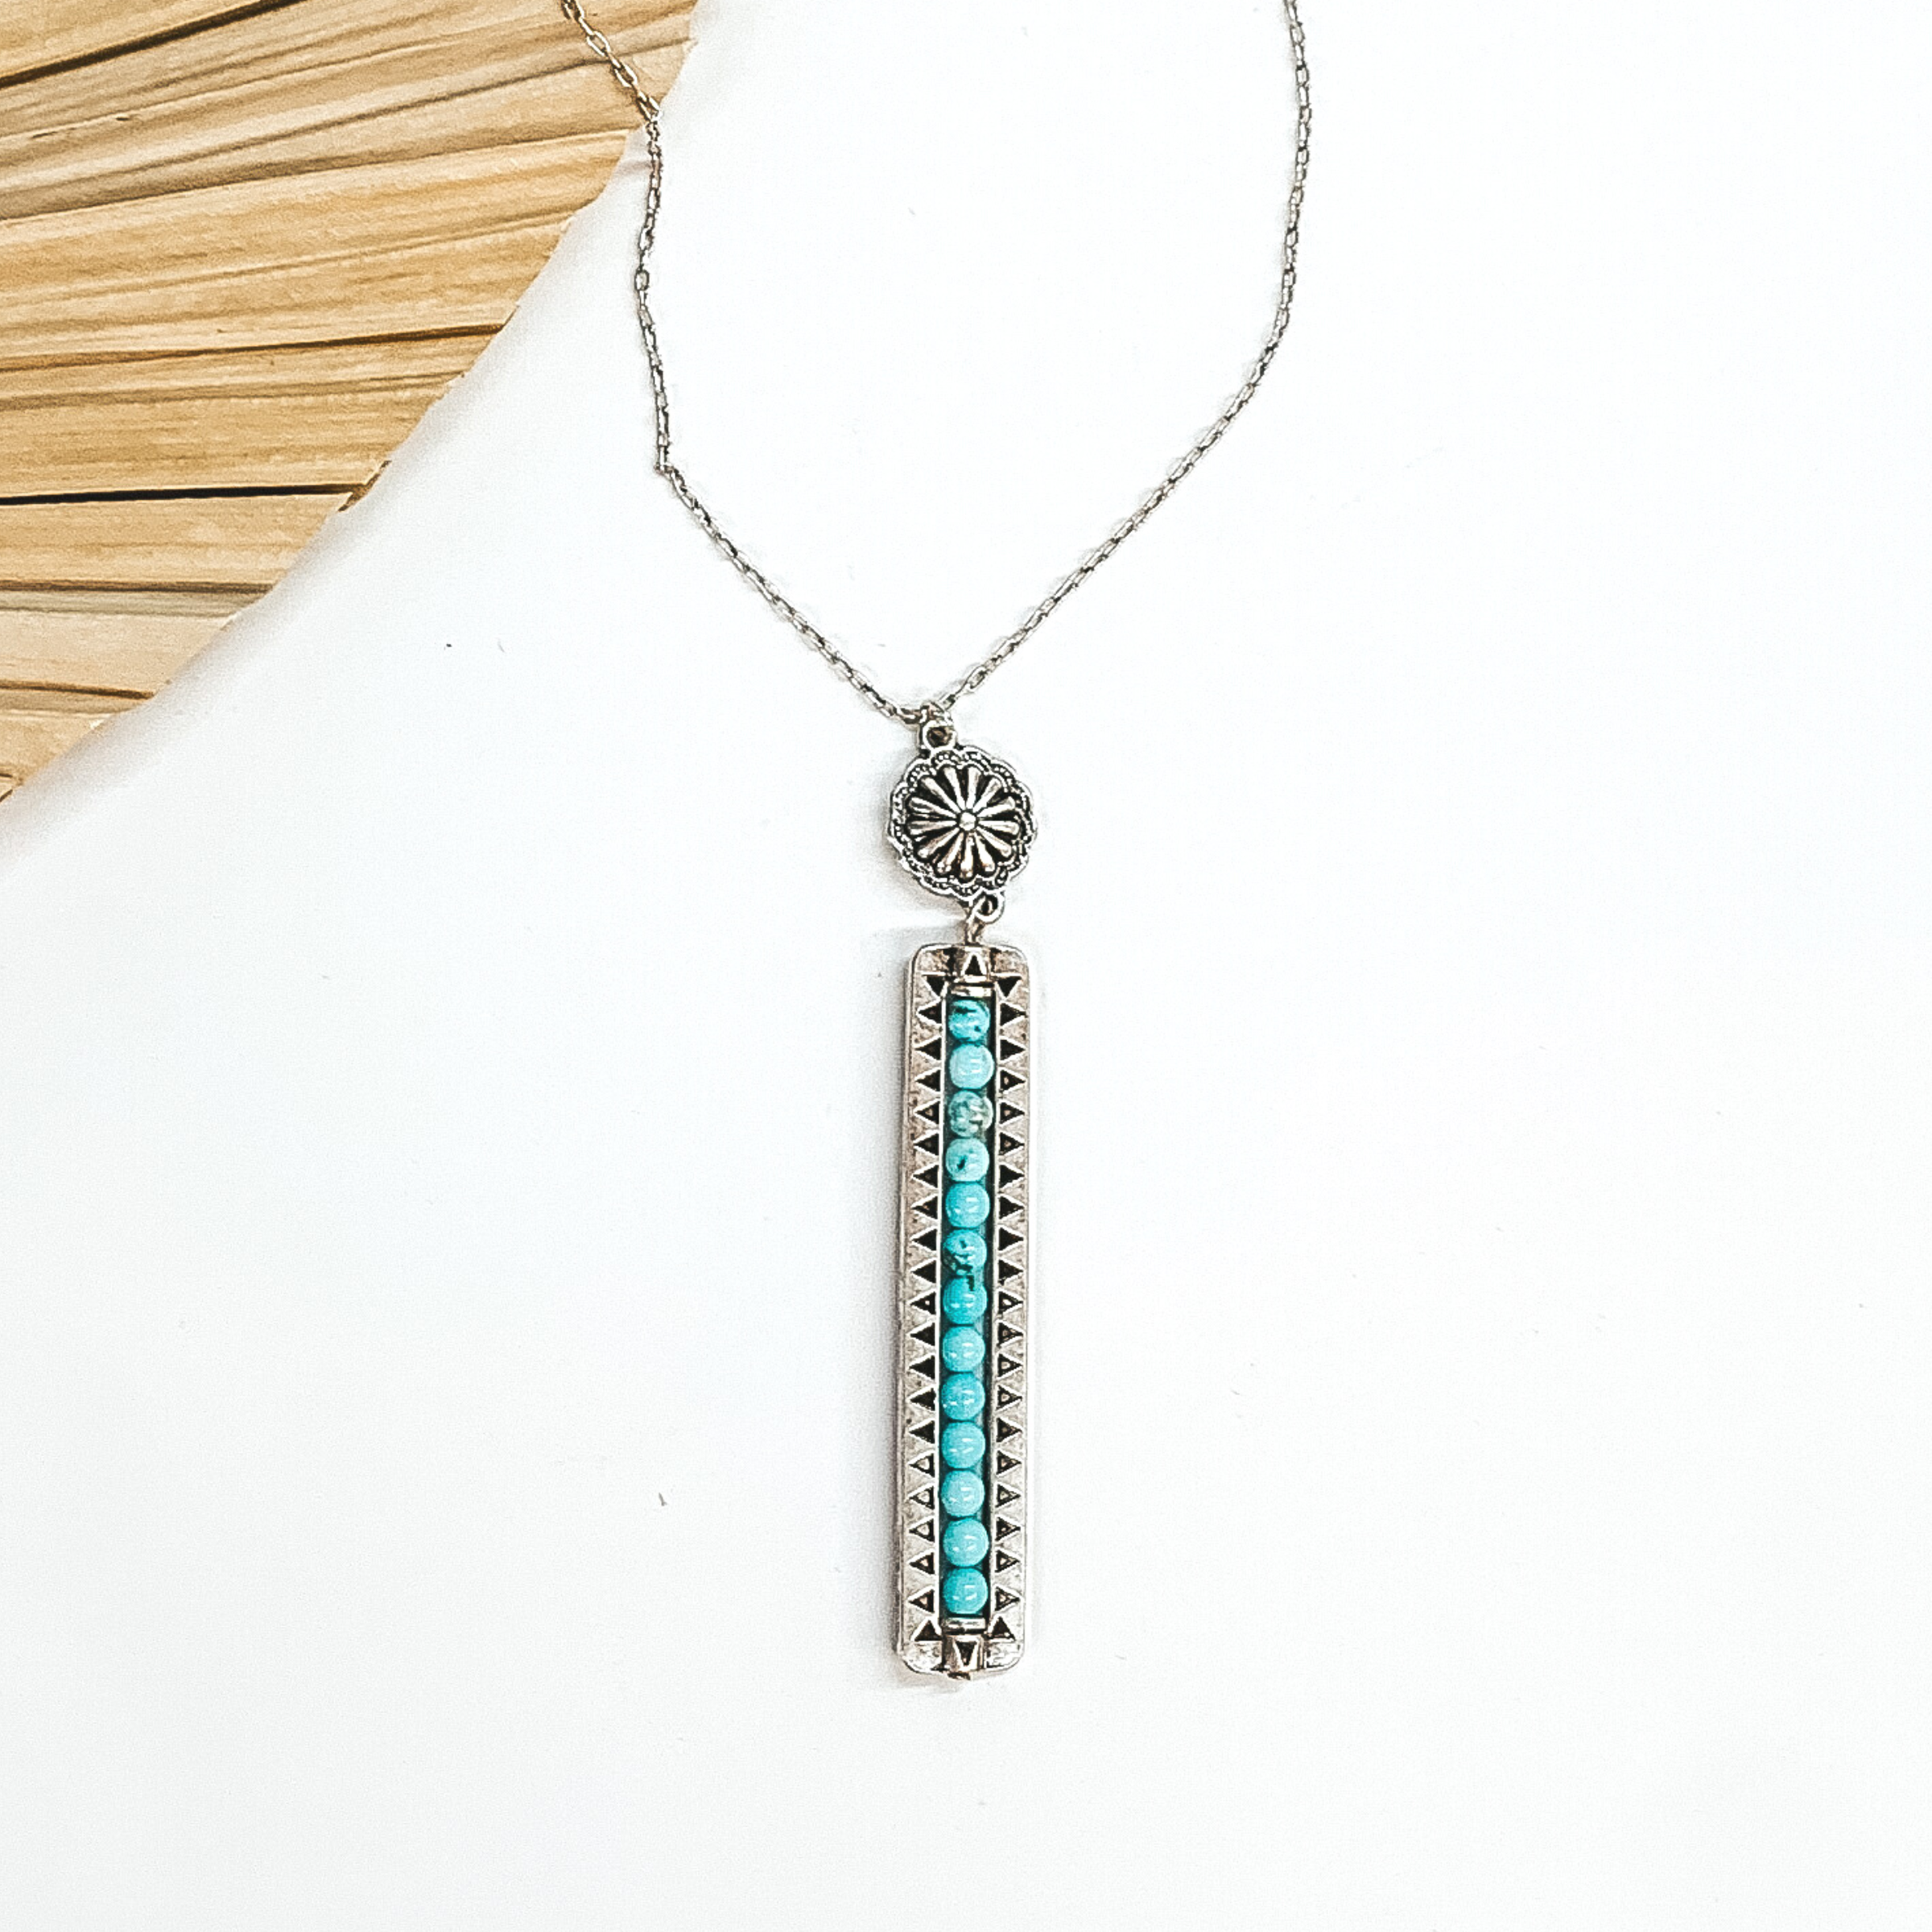 Friendly Ties Silver Necklace with Concho and Stone Beaded Bar Pendant in Turquoise - Giddy Up Glamour Boutique